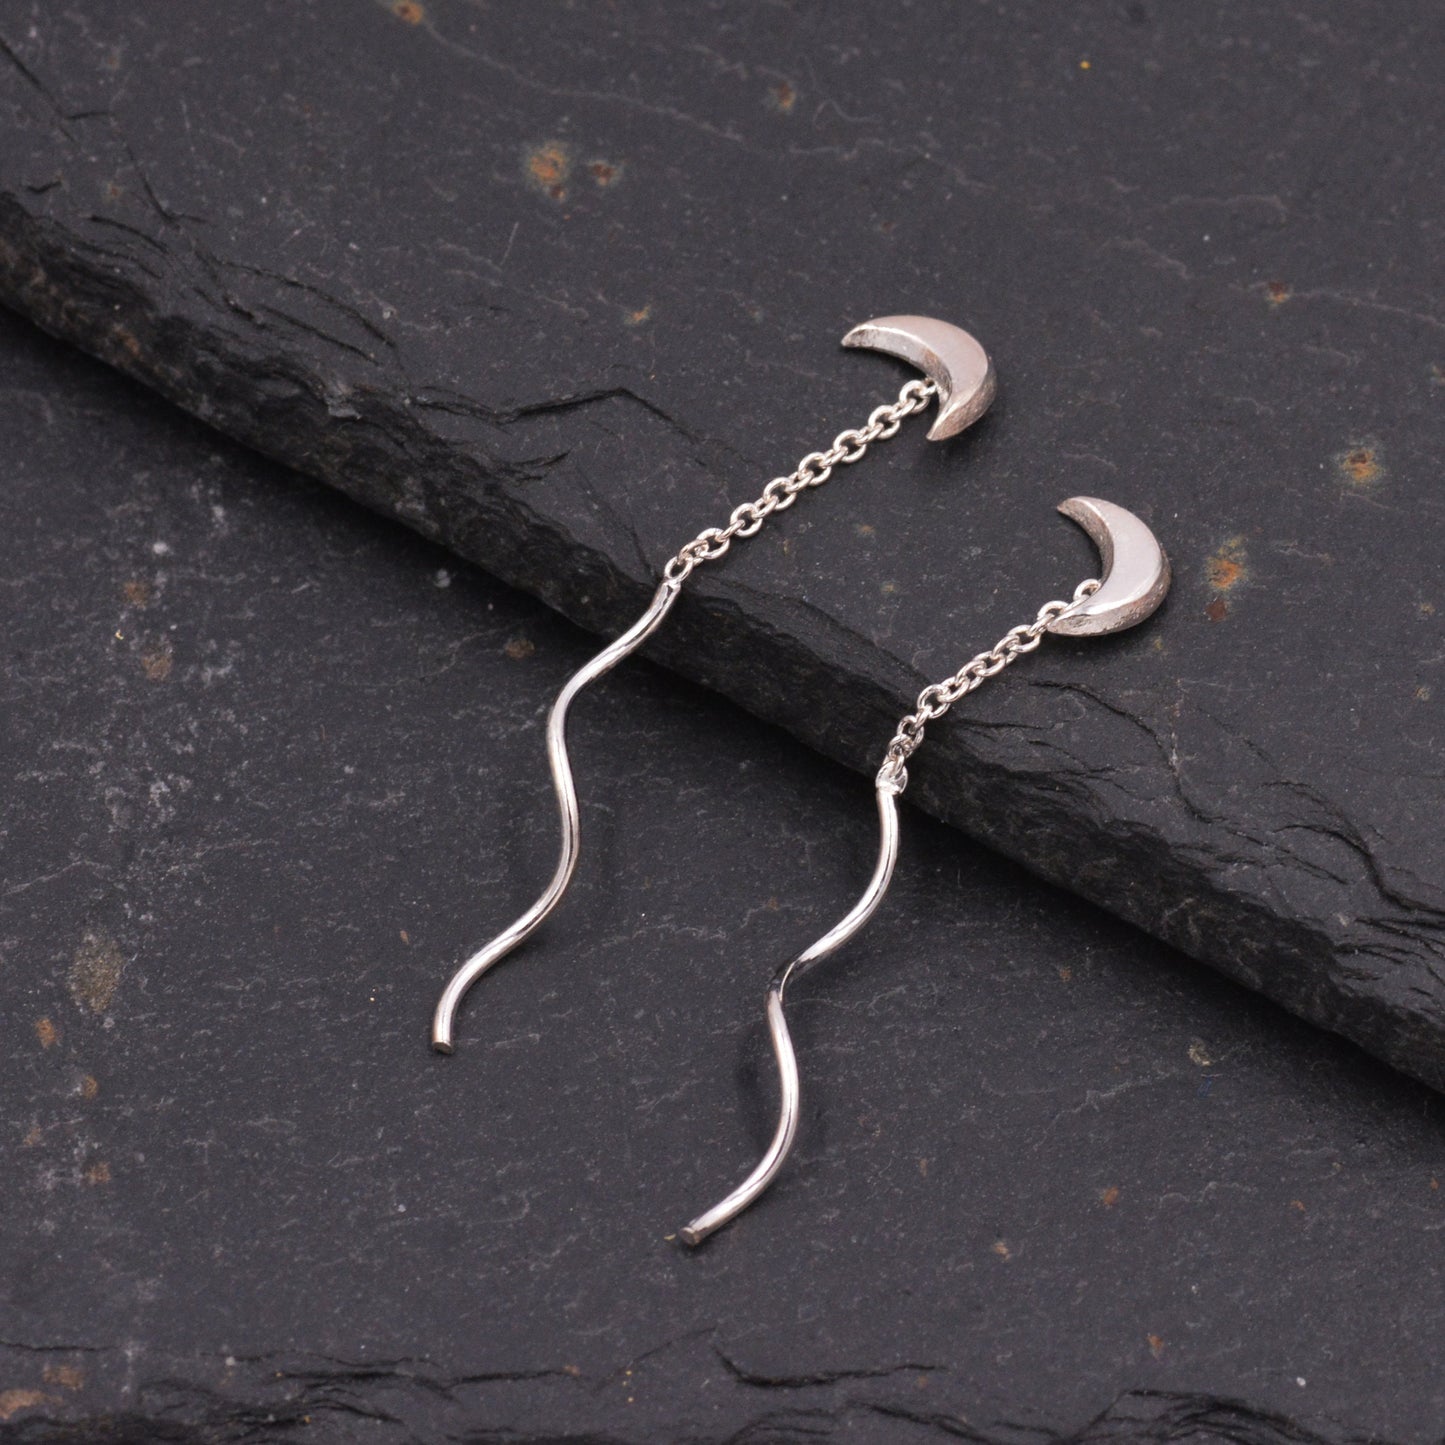 Sterling Silver Dainty Crescent Moon Threader Earrings, Silver or Gold, Swirl Ear Threader, Elegant and Pretty, Minimalist and Geometric